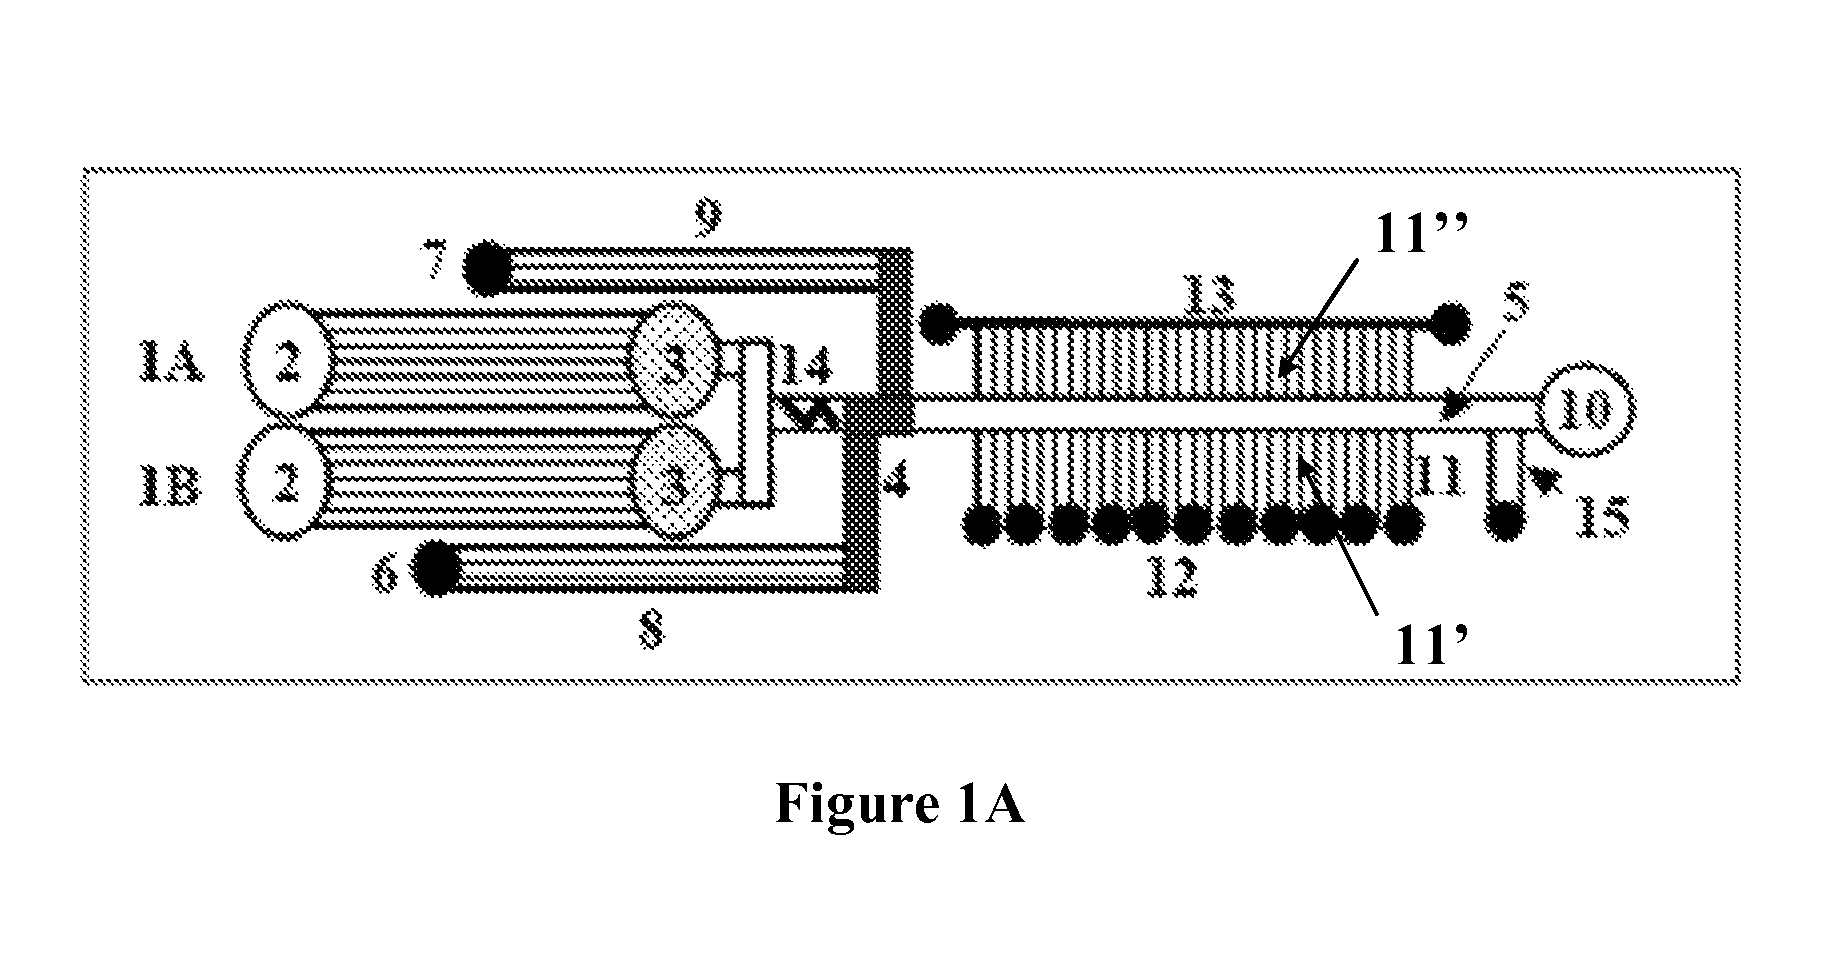 Microfluidic devices and methods facilitating high-throughput, on-chip detection and separation techniques